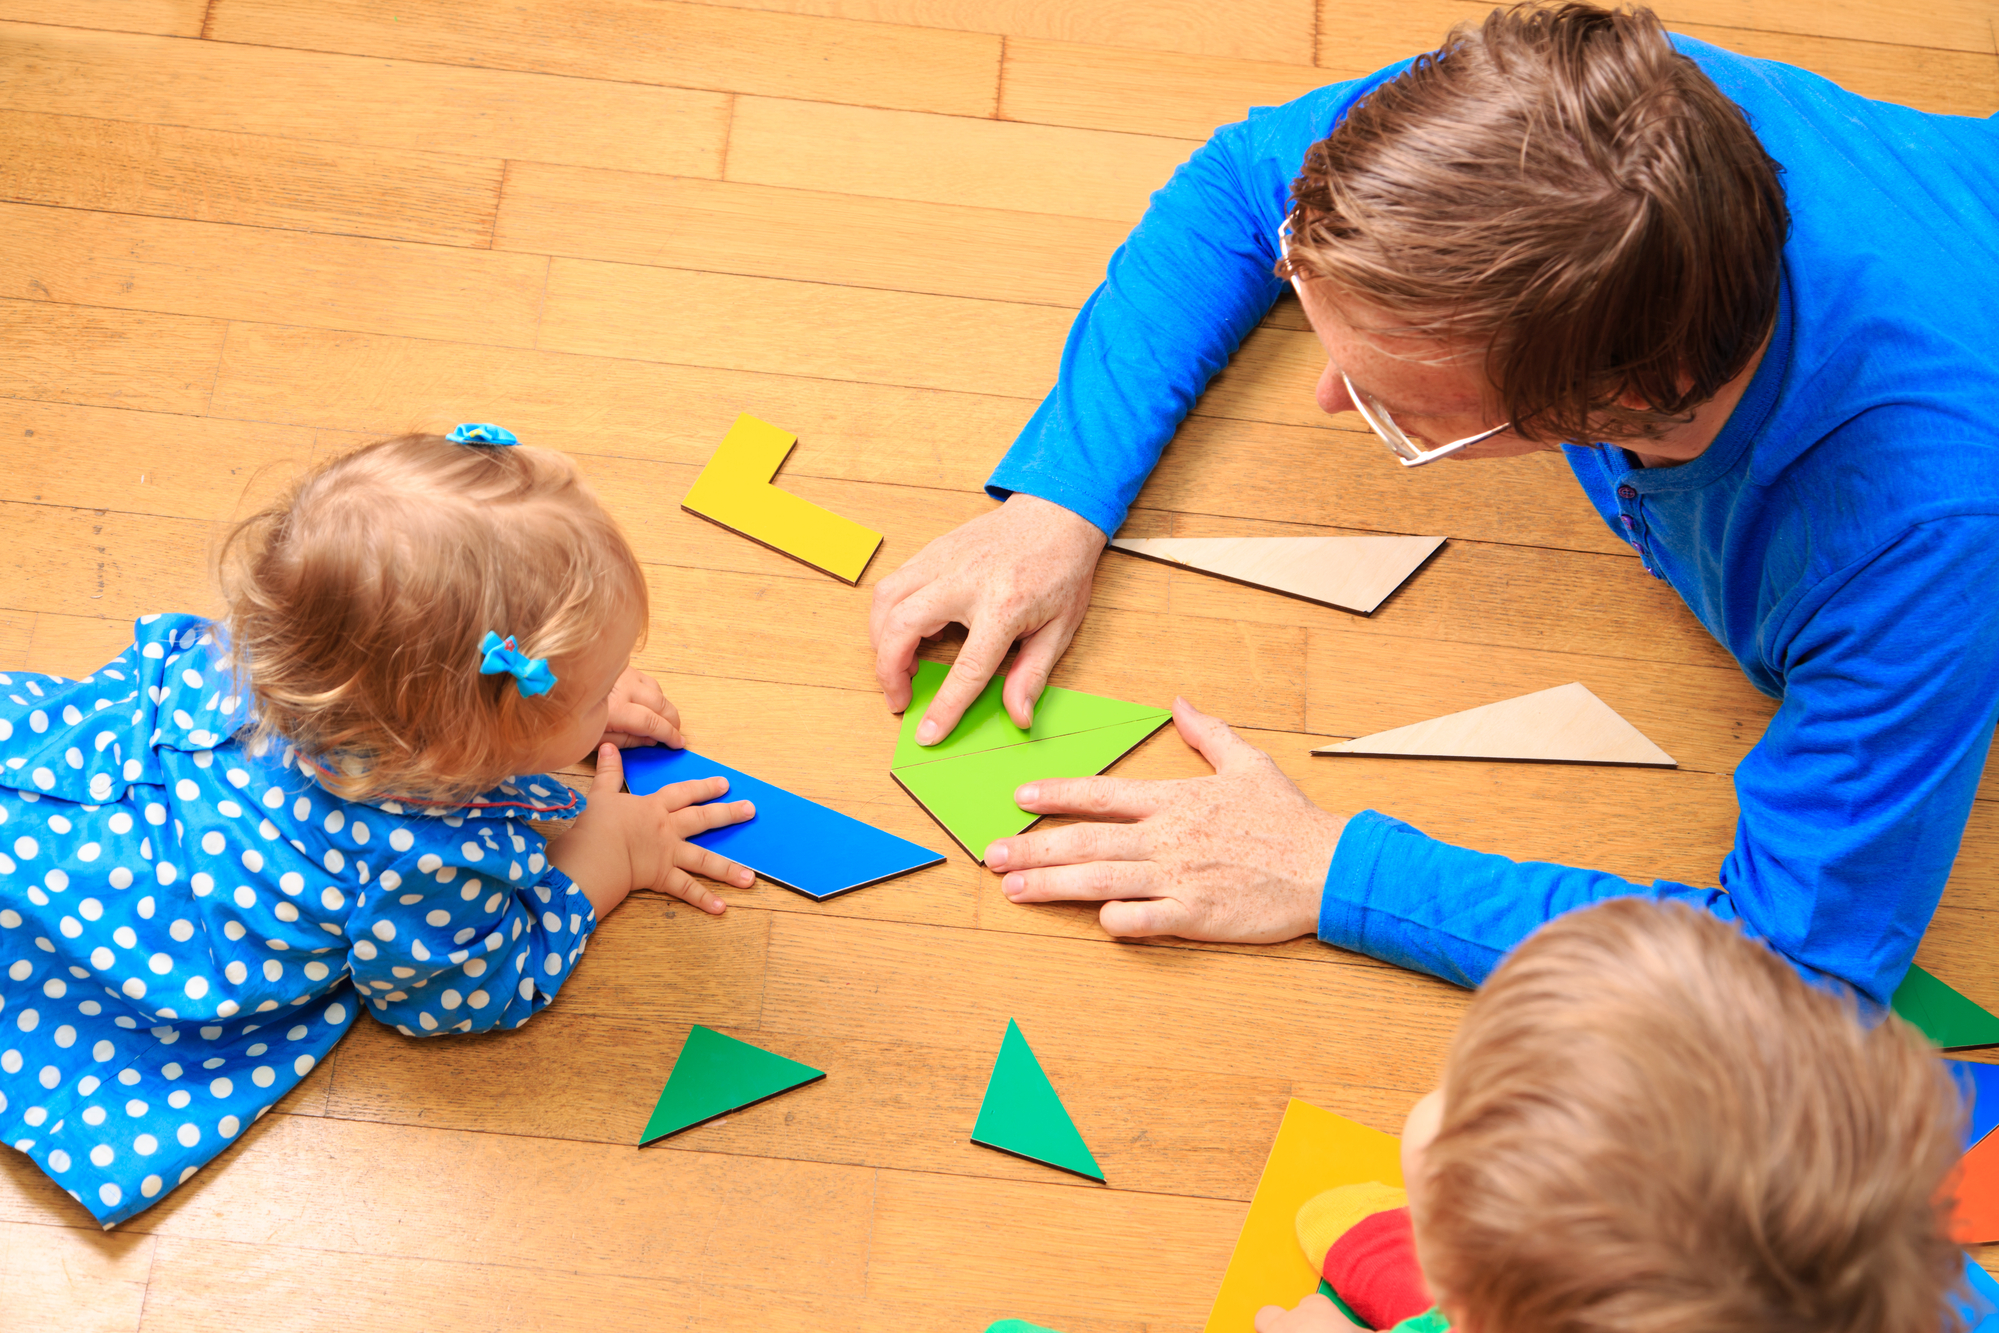 a-guide-to-introducing-math-concepts-to-your-toddler-palm-academy